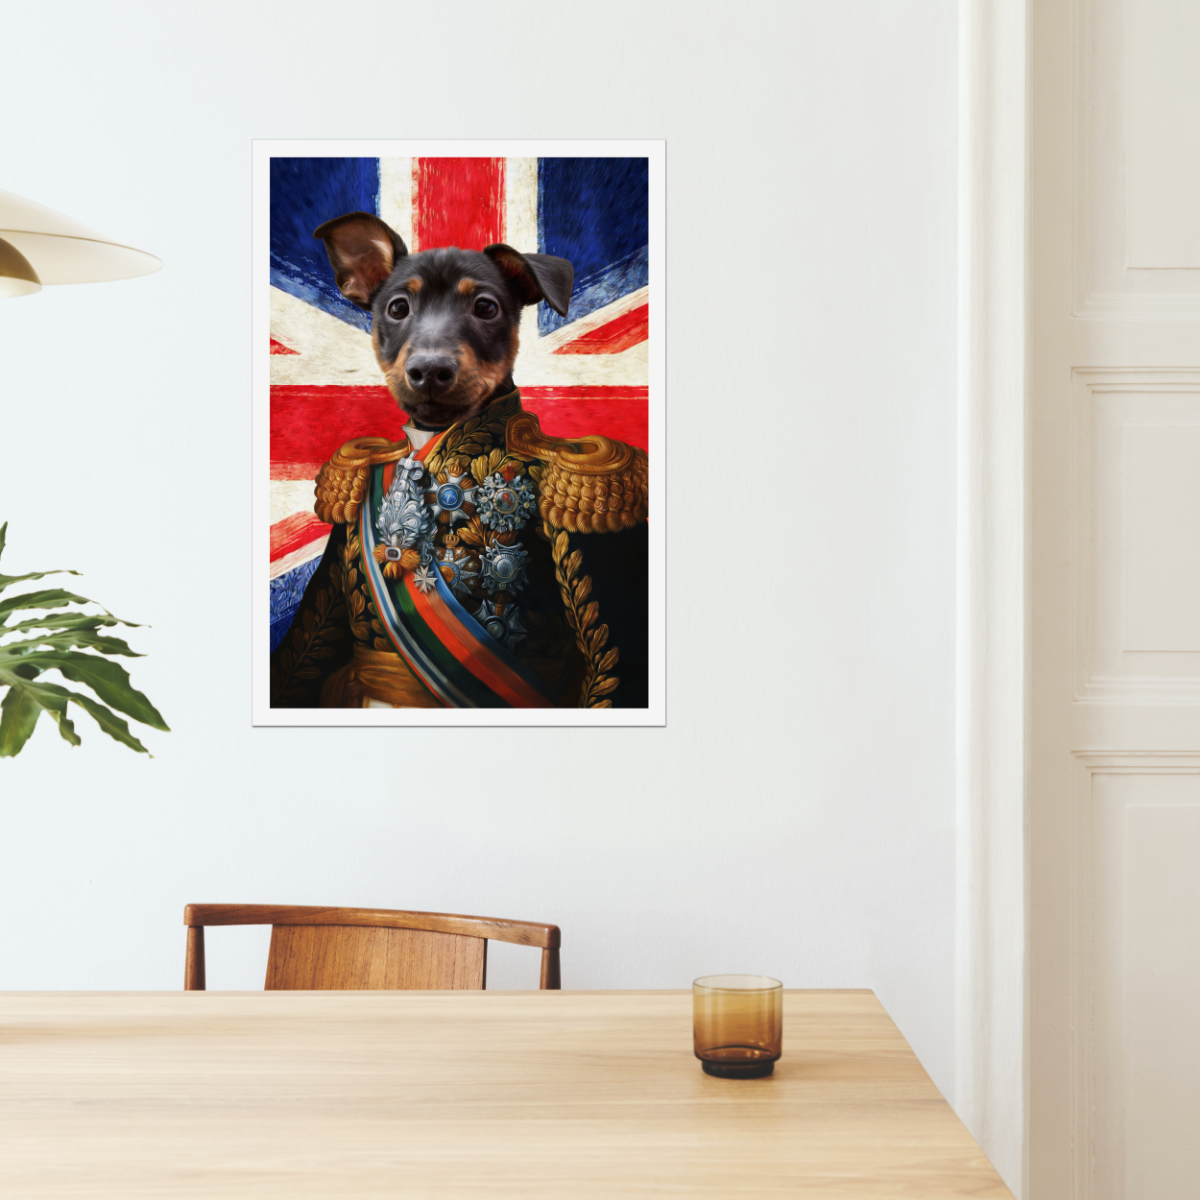 The First Lieutenant British Flag Edition: Custom Pet Poster - Paw & Glory - #pet portraits# - #dog portraits# - #pet portraits uk#Paw & Glory, paw and glory, best pet portraits, louvenir pet portrait pet portrait painting from photo cheap dog portraits dog caricatures, personalized dog art pet portraits